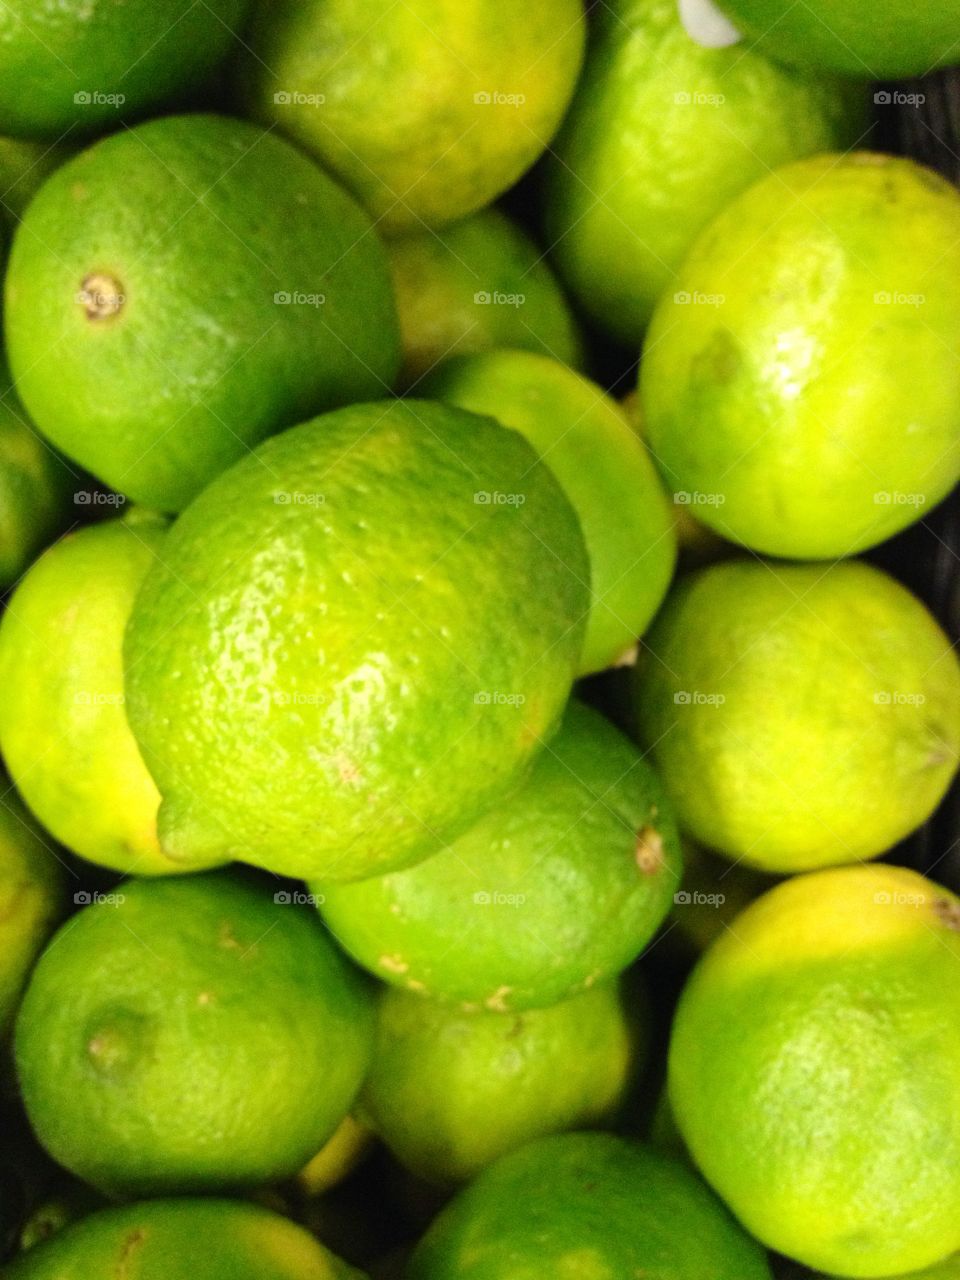 Green Color Story - Bunch limes